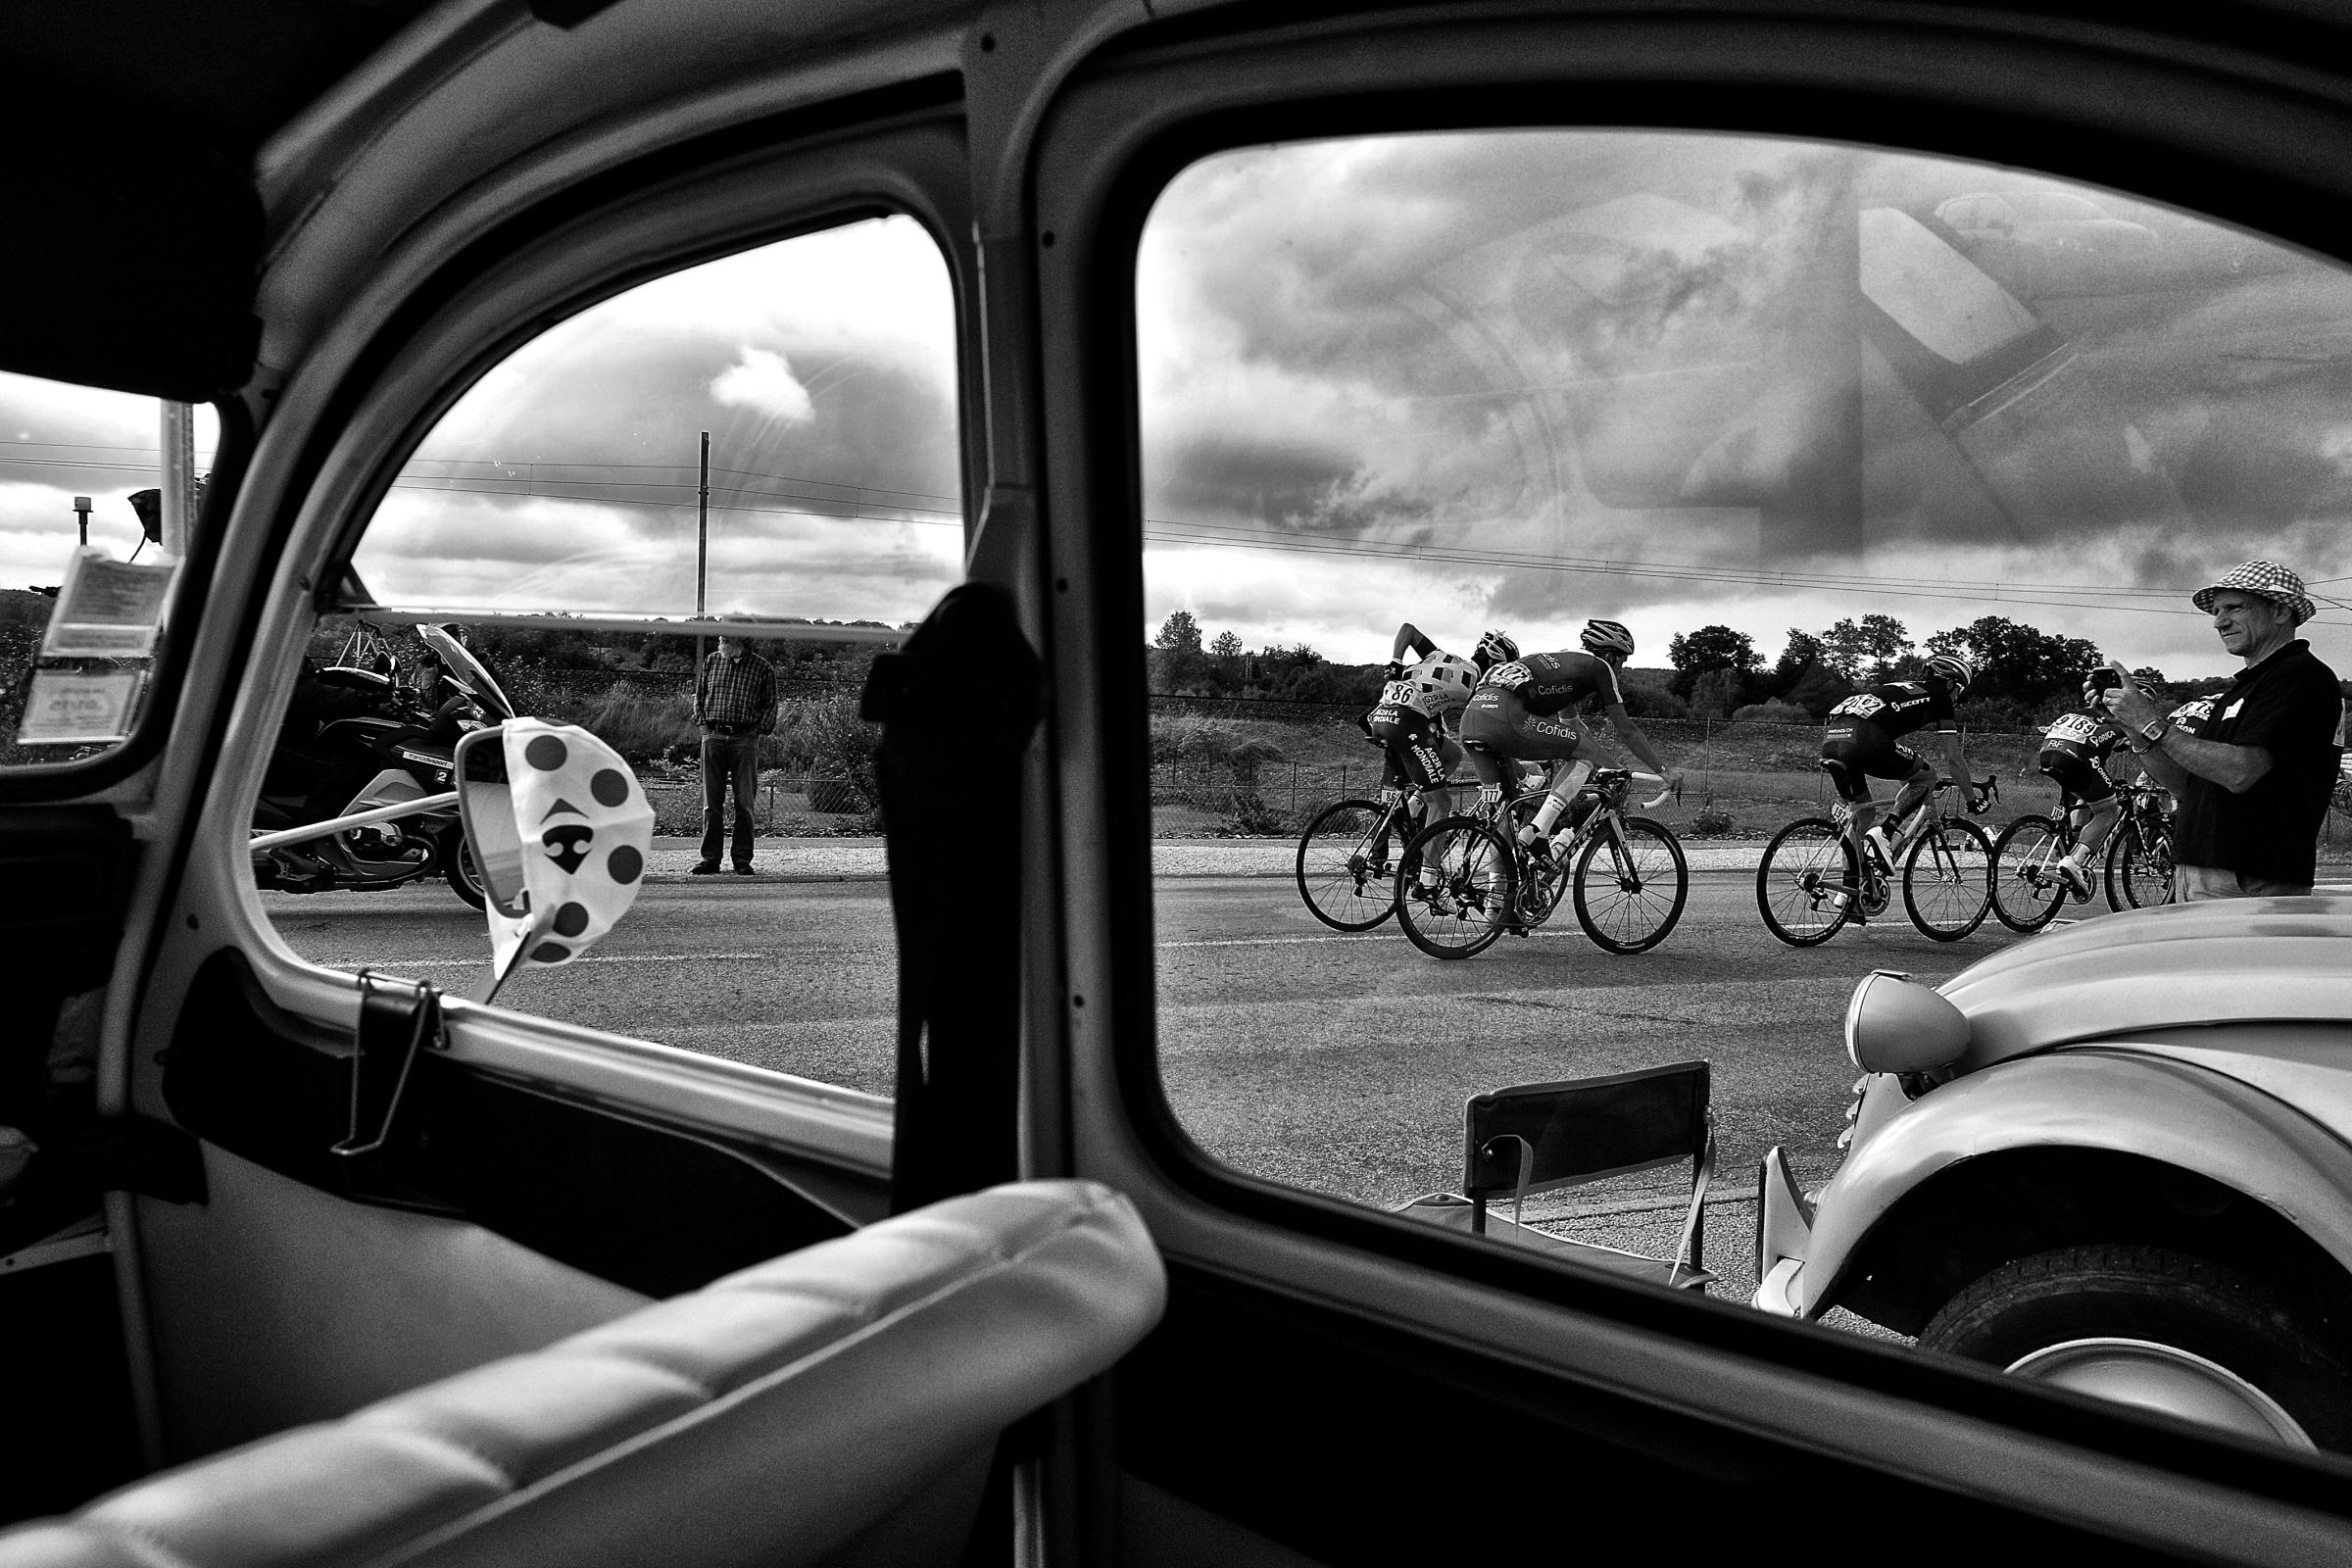 Cyclists riding is seen through a windscreen during the 161 km eighth stage of the 101st edition of the Tour de France cycling race on July 12, 2014 between Tomblaine and Gerardmer La Mauselaine, France.